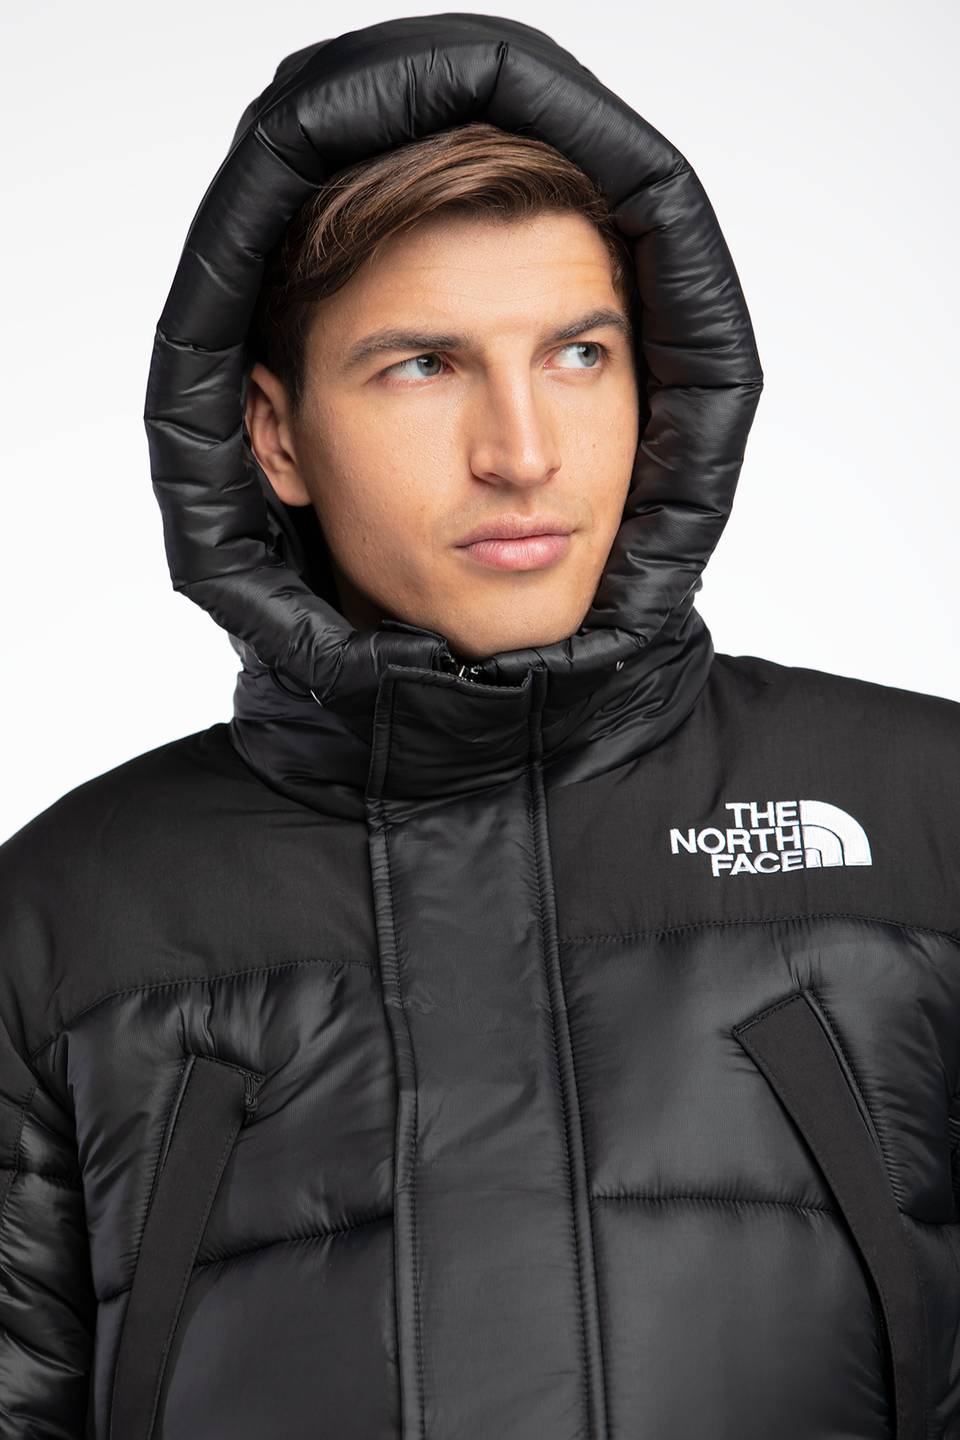 Kurtka The North Face HMLYN INSULATED PARKA NF0A4QZ5JK31